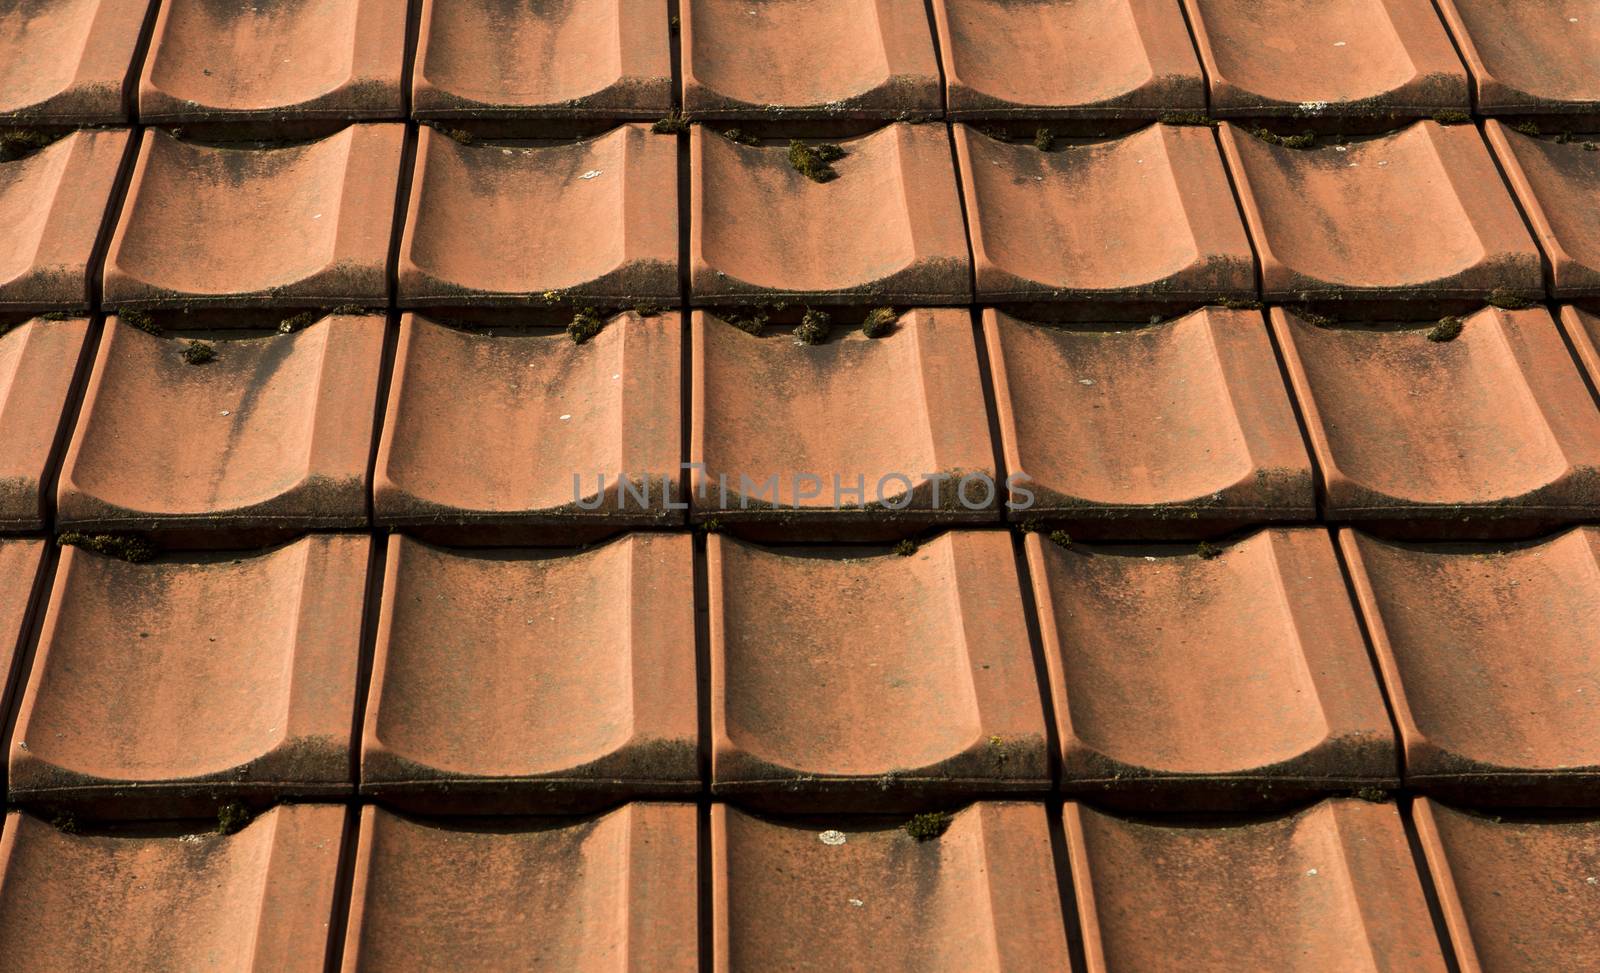 roof tiles by Tomjac1980